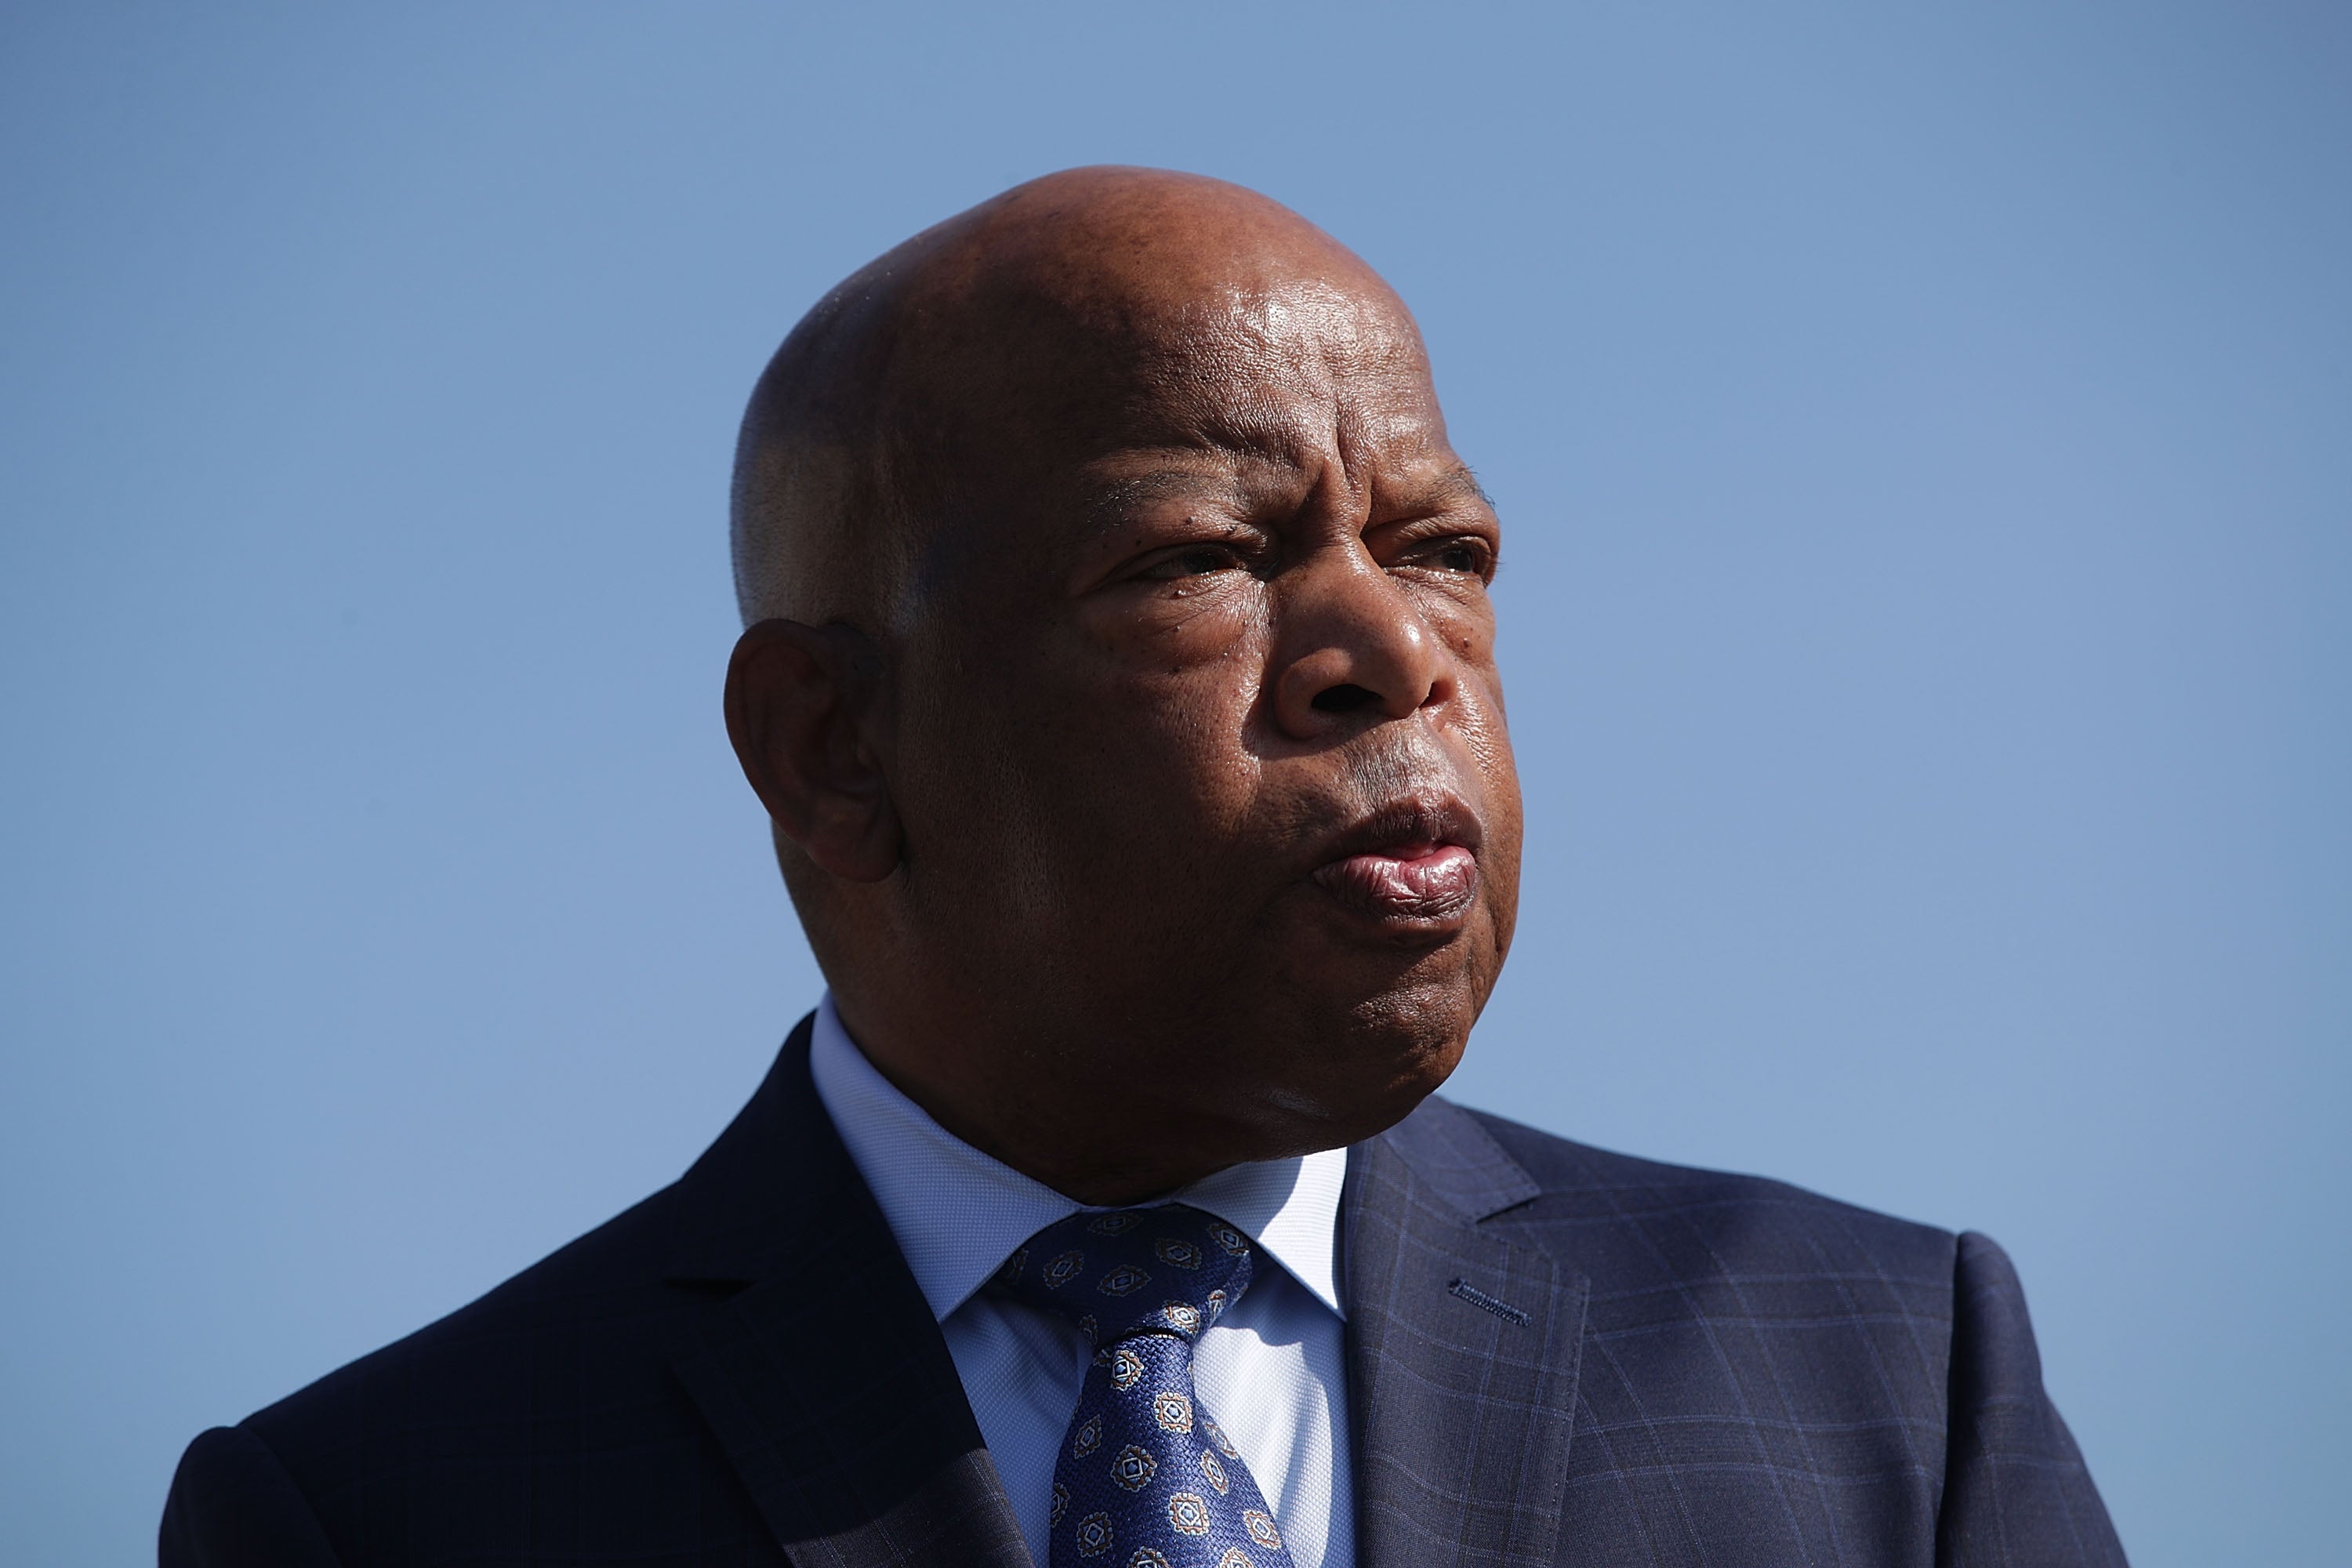 U.S. Rep. John Lewis (D-GA) listens during a news conference September 25, 2017 on Capitol Hill in Washington, DC